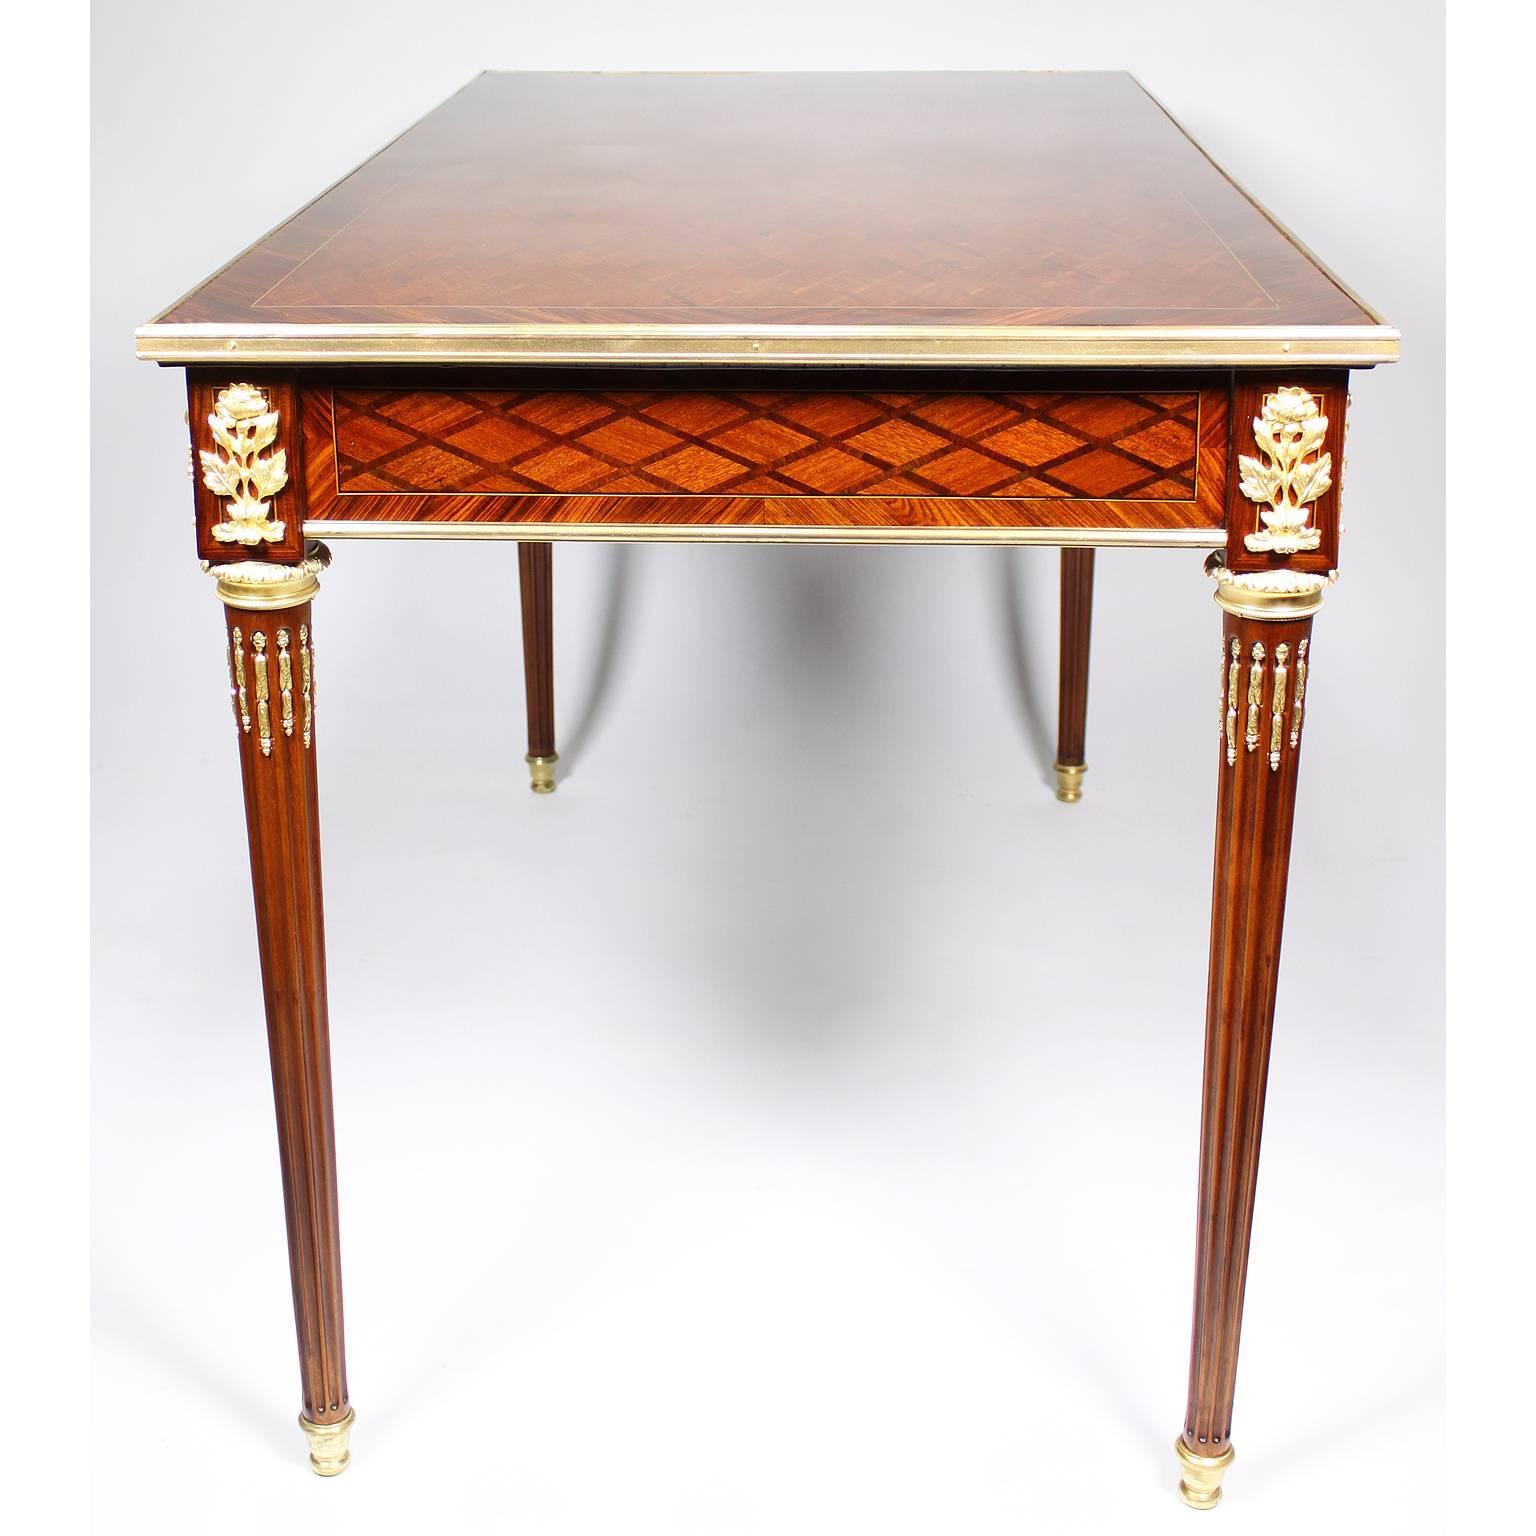 French Louis XVI Style Kingwood Parquetry & Ormolu Mounted Ladies Writing Table For Sale 2